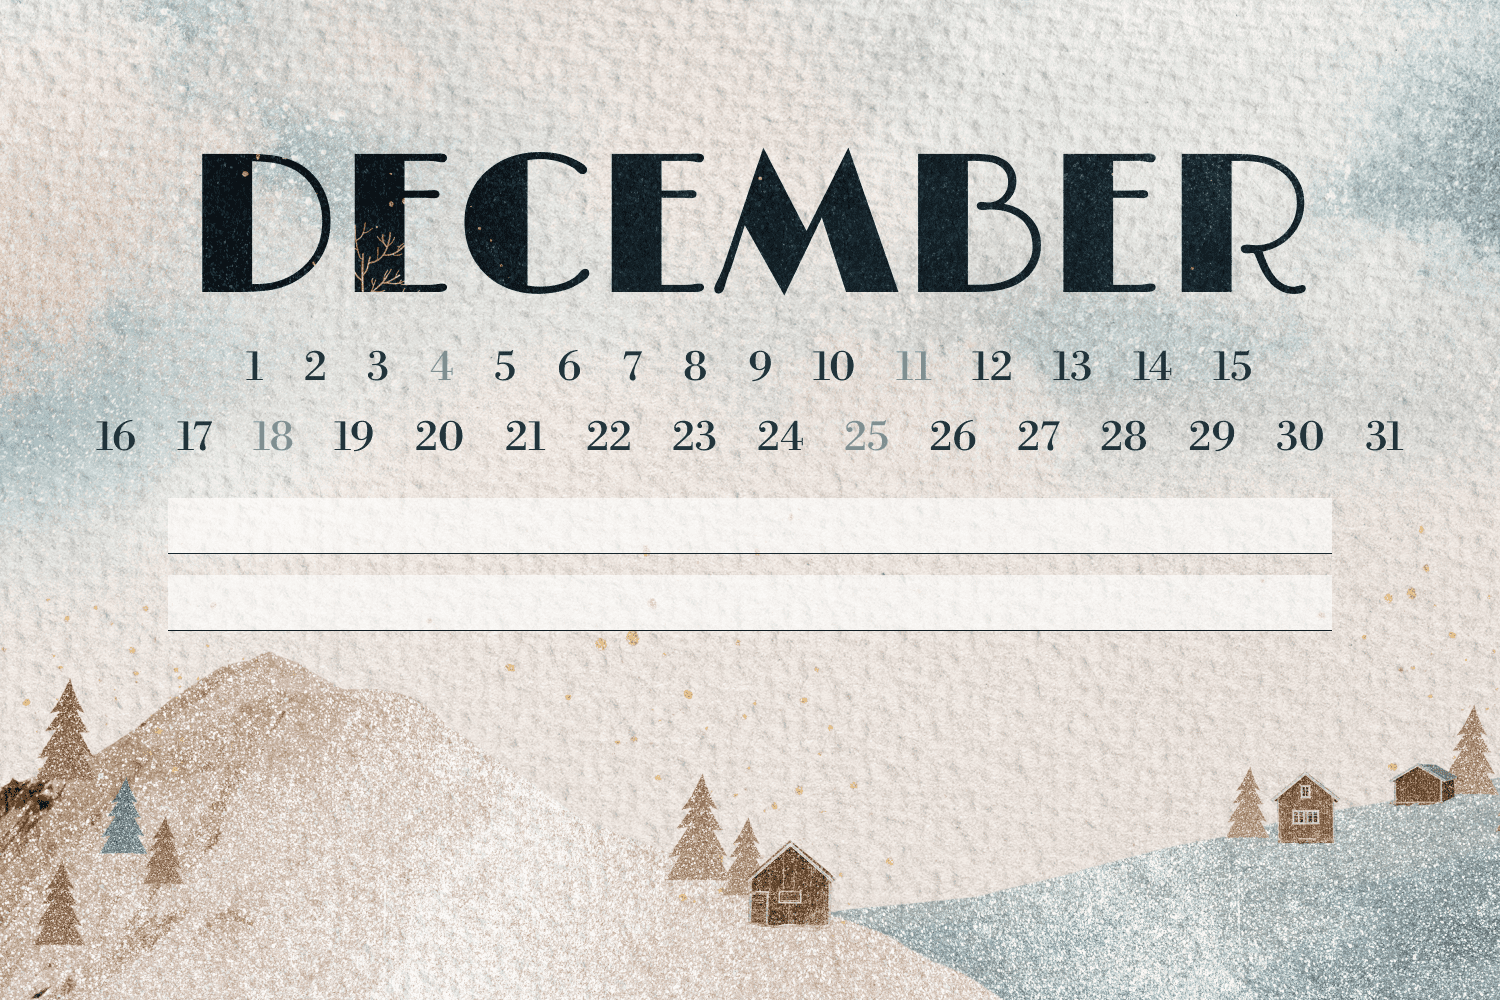 December calendar with painted hills, firs and houses.